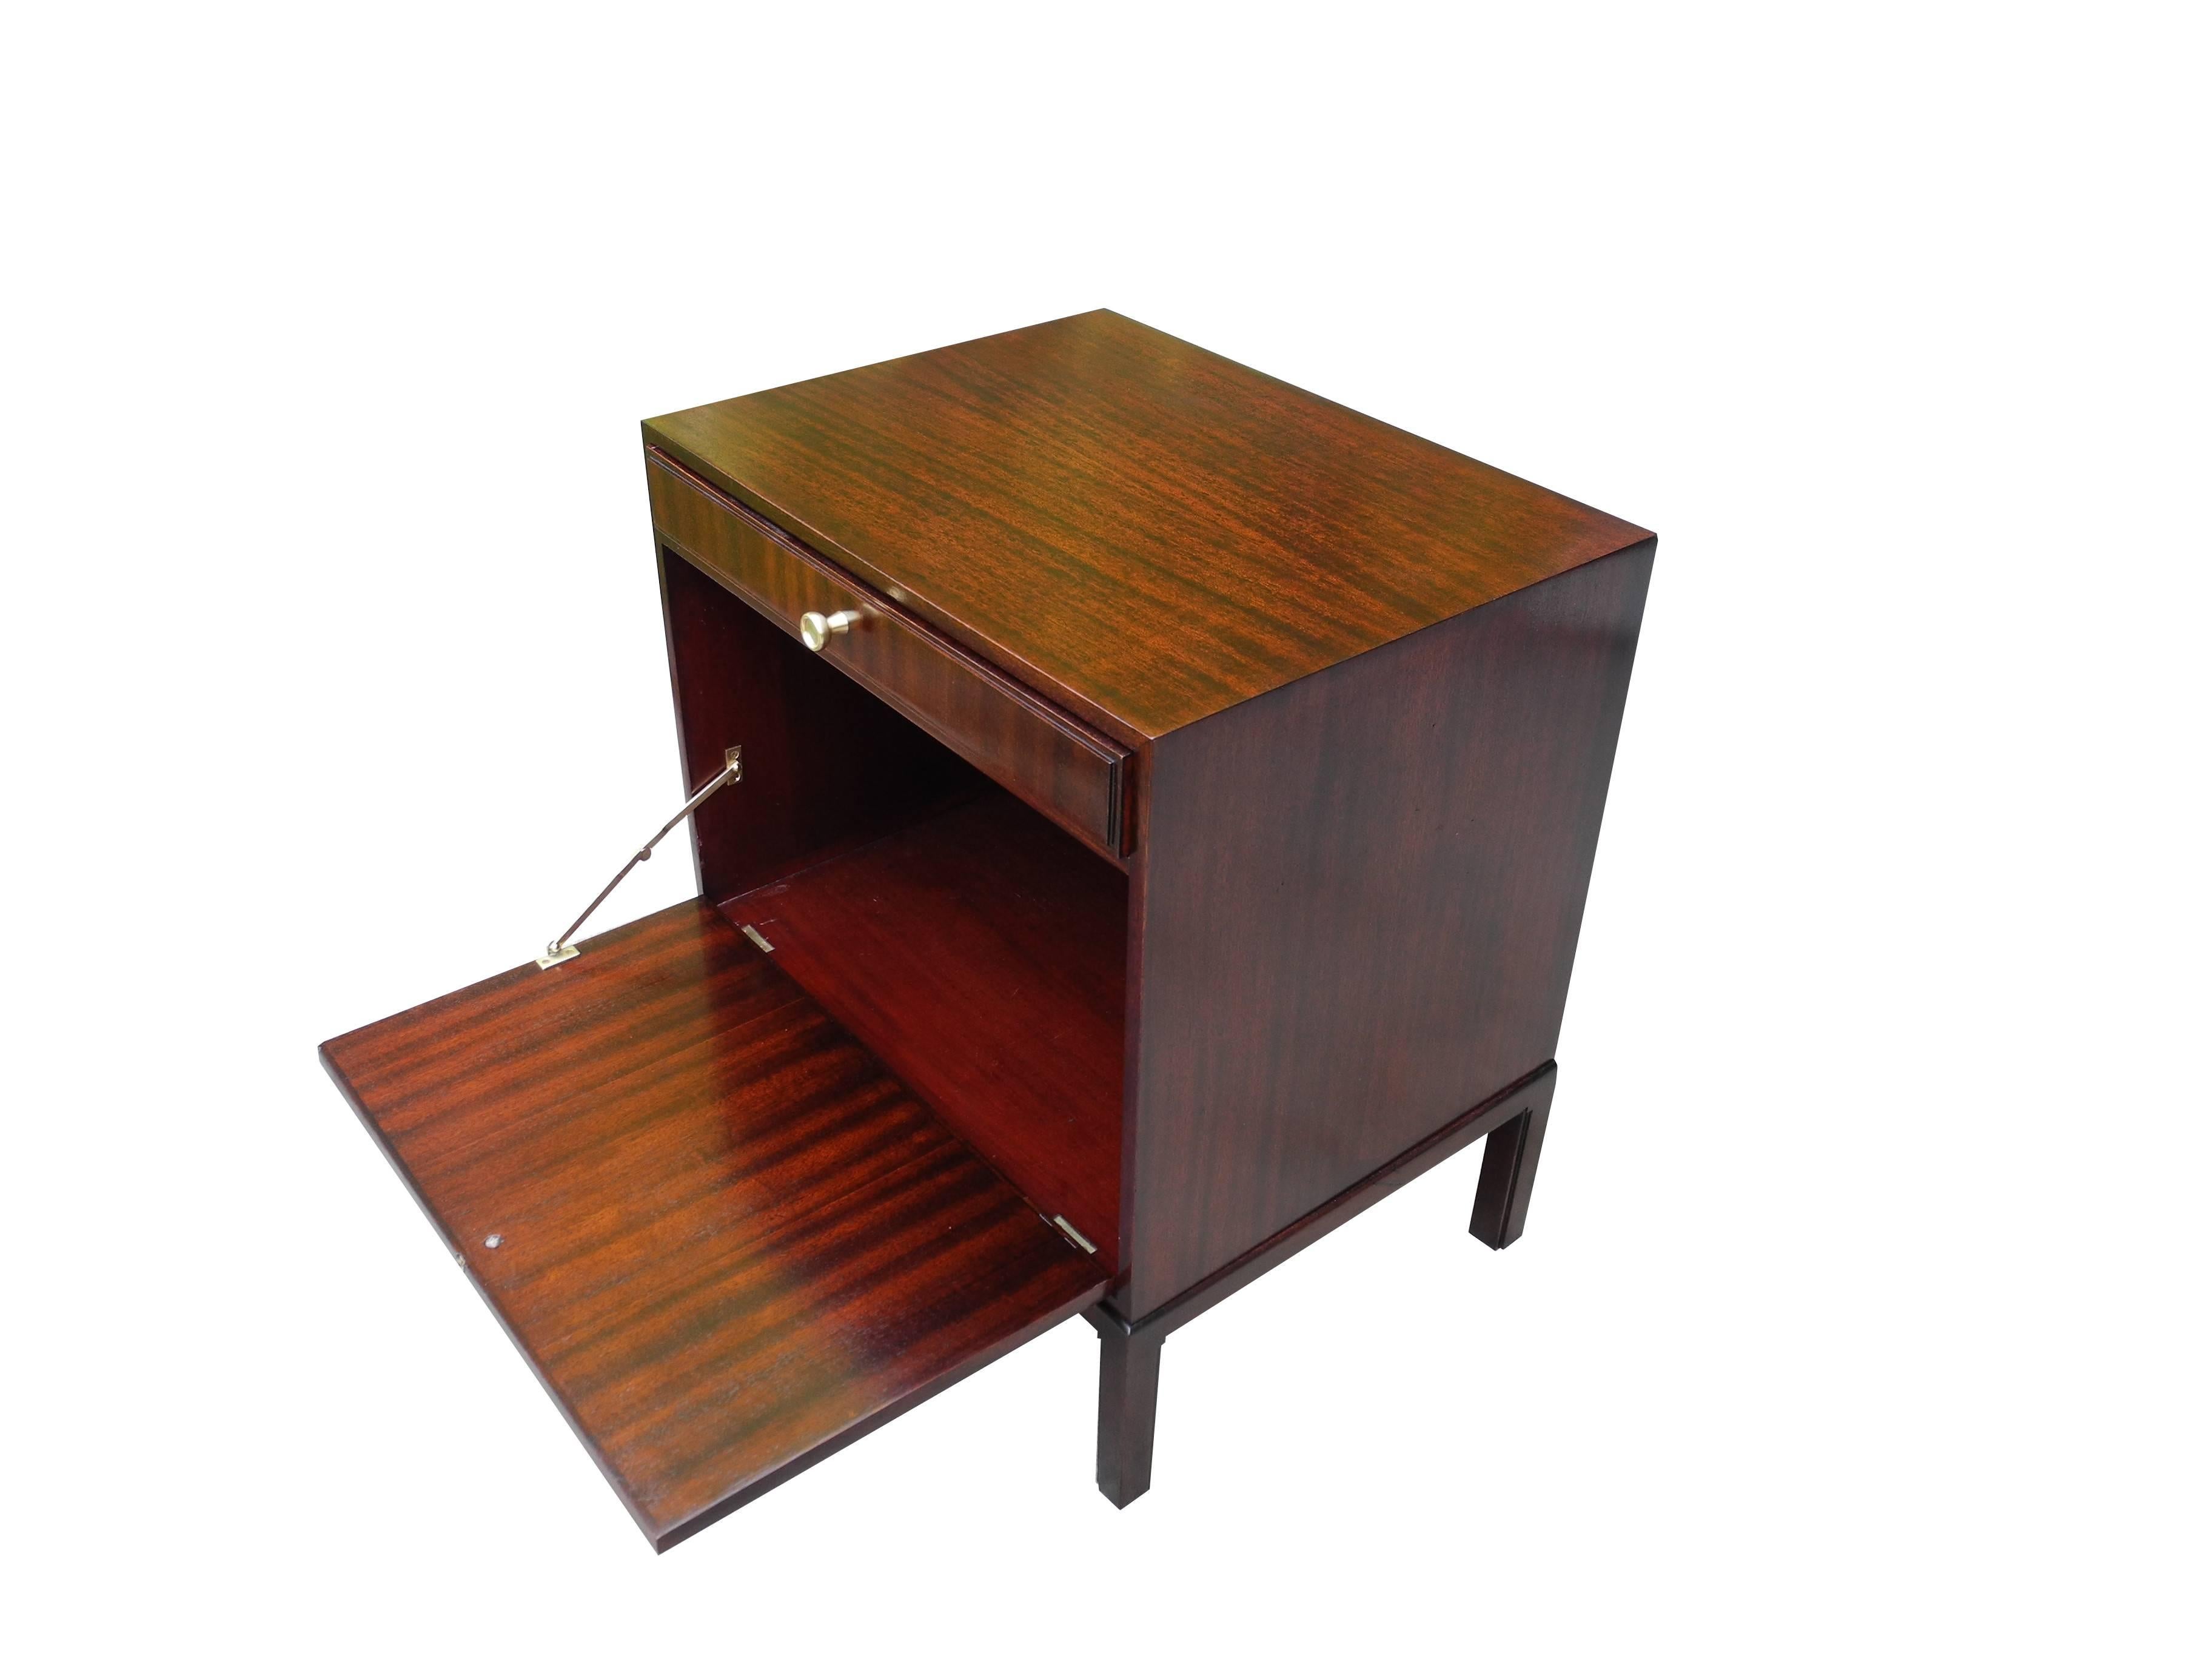 This drop down mahogany little cabinet or nightstand with solid brass hardware is a true charm. Designed by Tommi Parzinger for Charak in the 1950s.
   